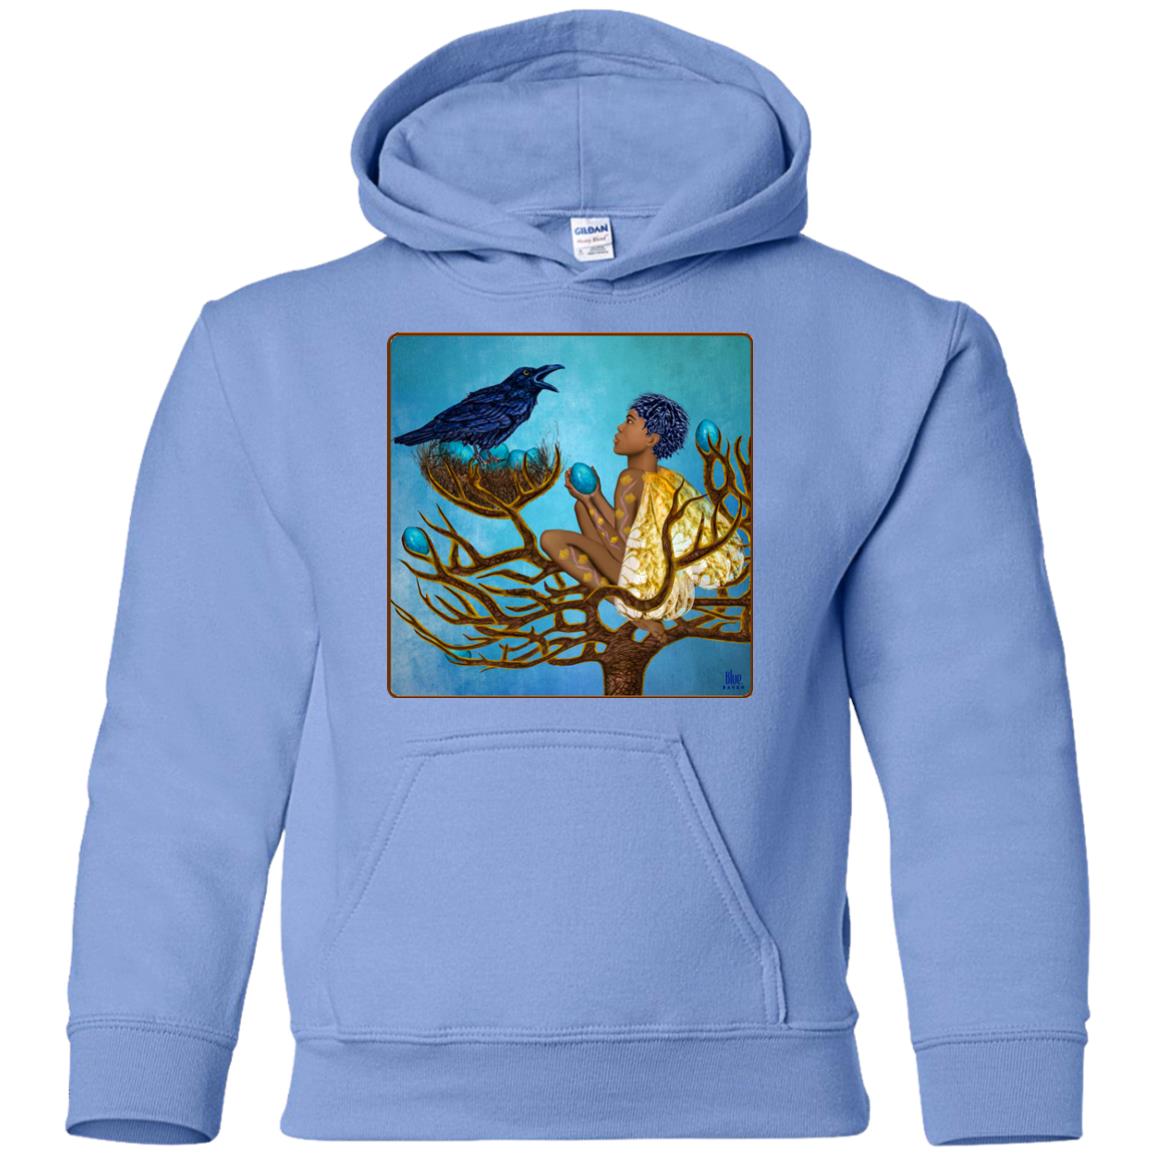 The blue raven's friend - Youth Hoodie